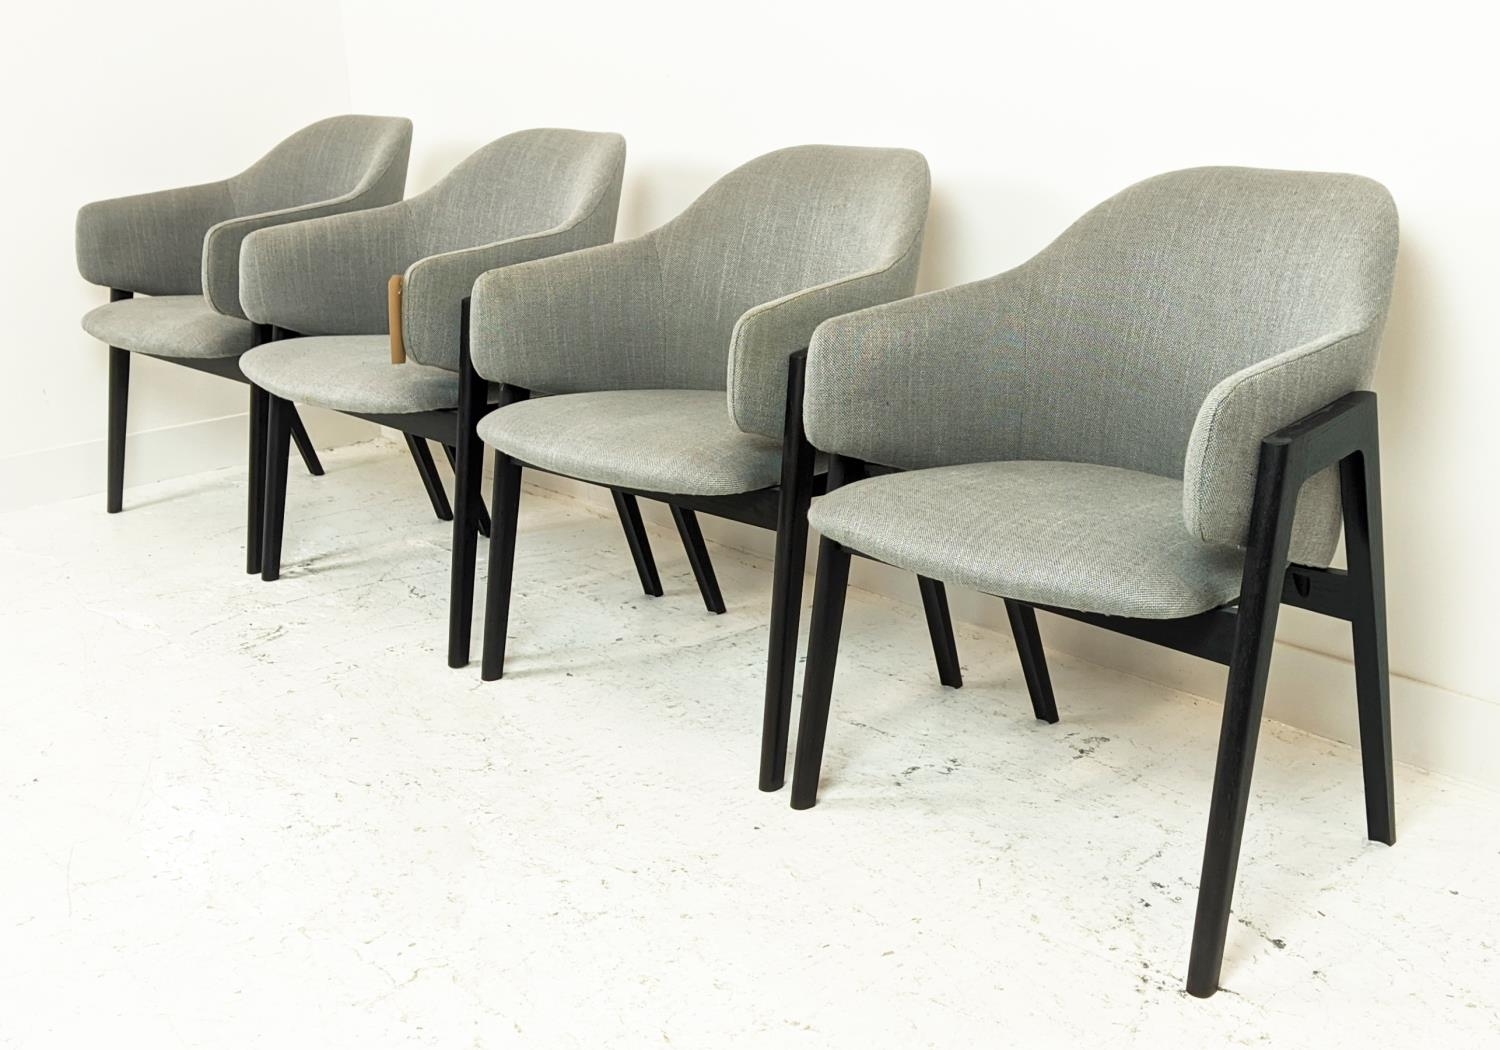 LINLEY SAVILLE DINING CHAIRS, a set of four, by Matthew Hilton, 80cm H approx. (4) - Image 4 of 11